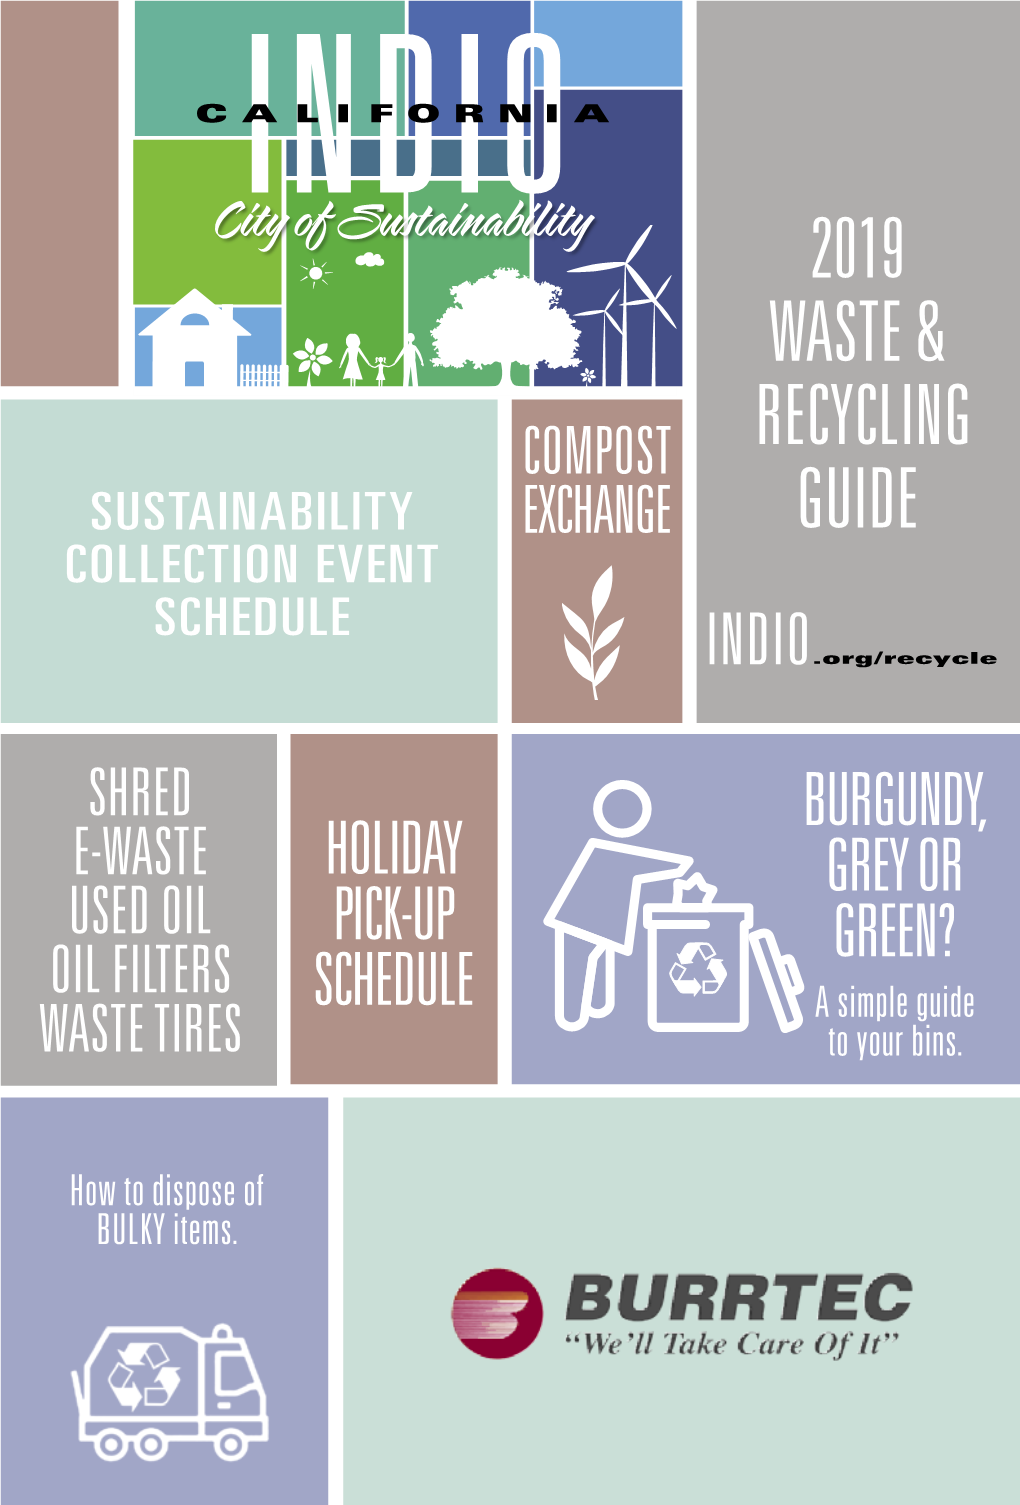 2019 Waste & Recycling Guide